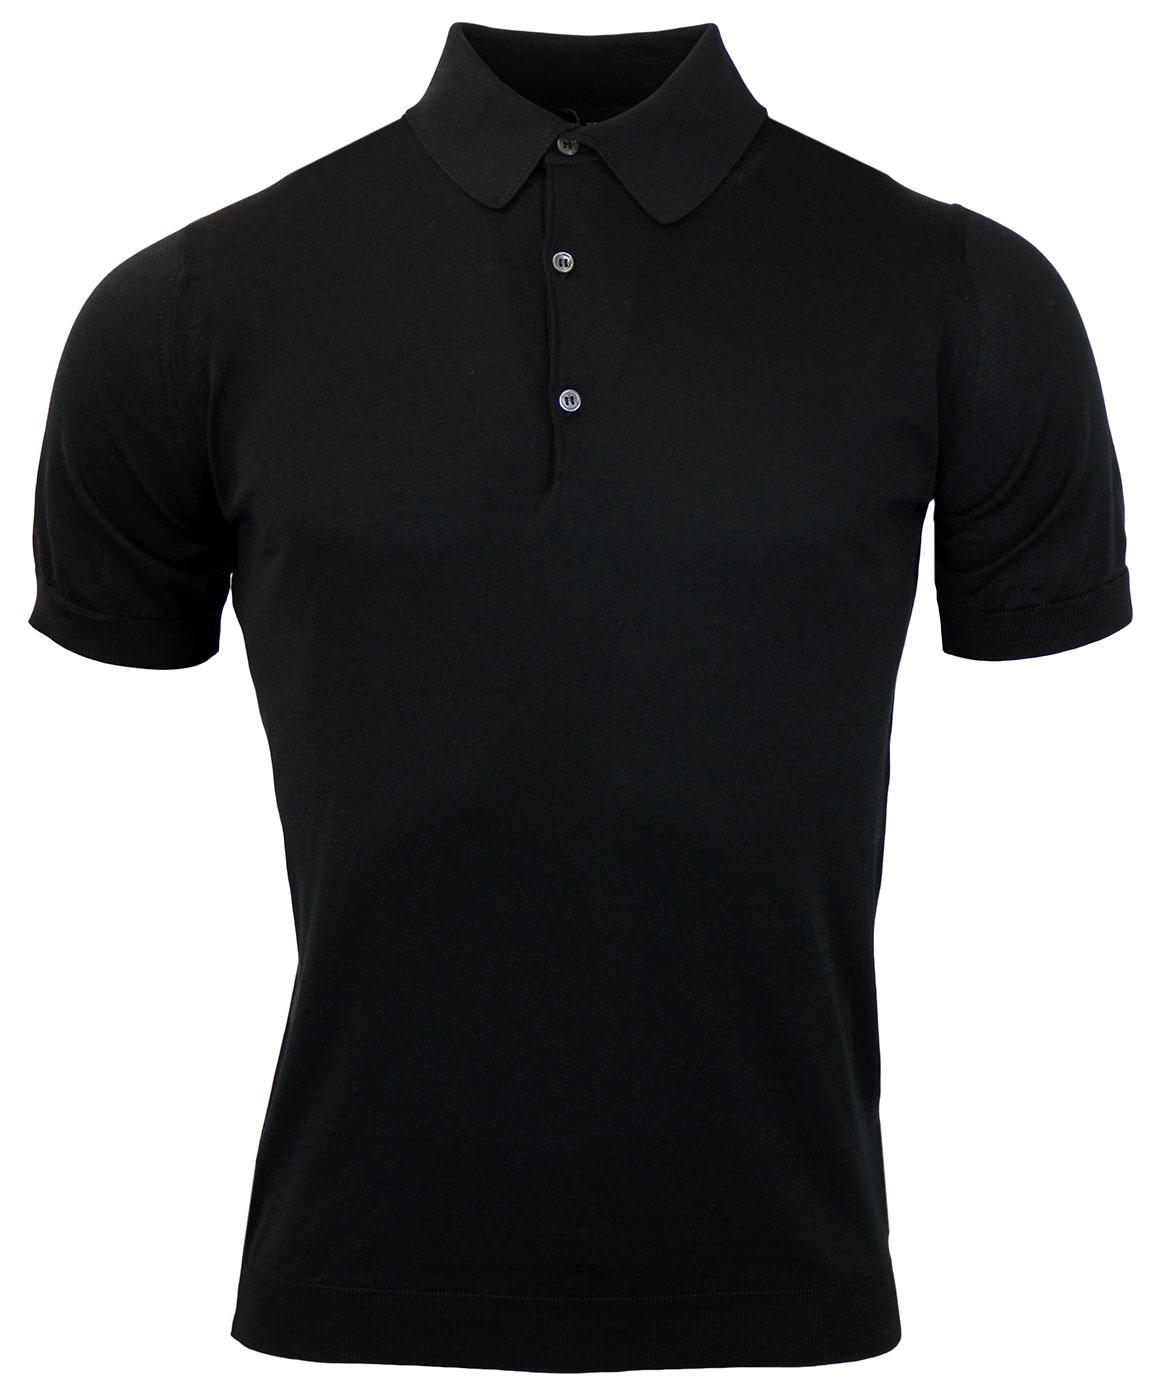 Adrian JOHN SMEDLEY Mens Mod Knitted Polo Shirt in Black